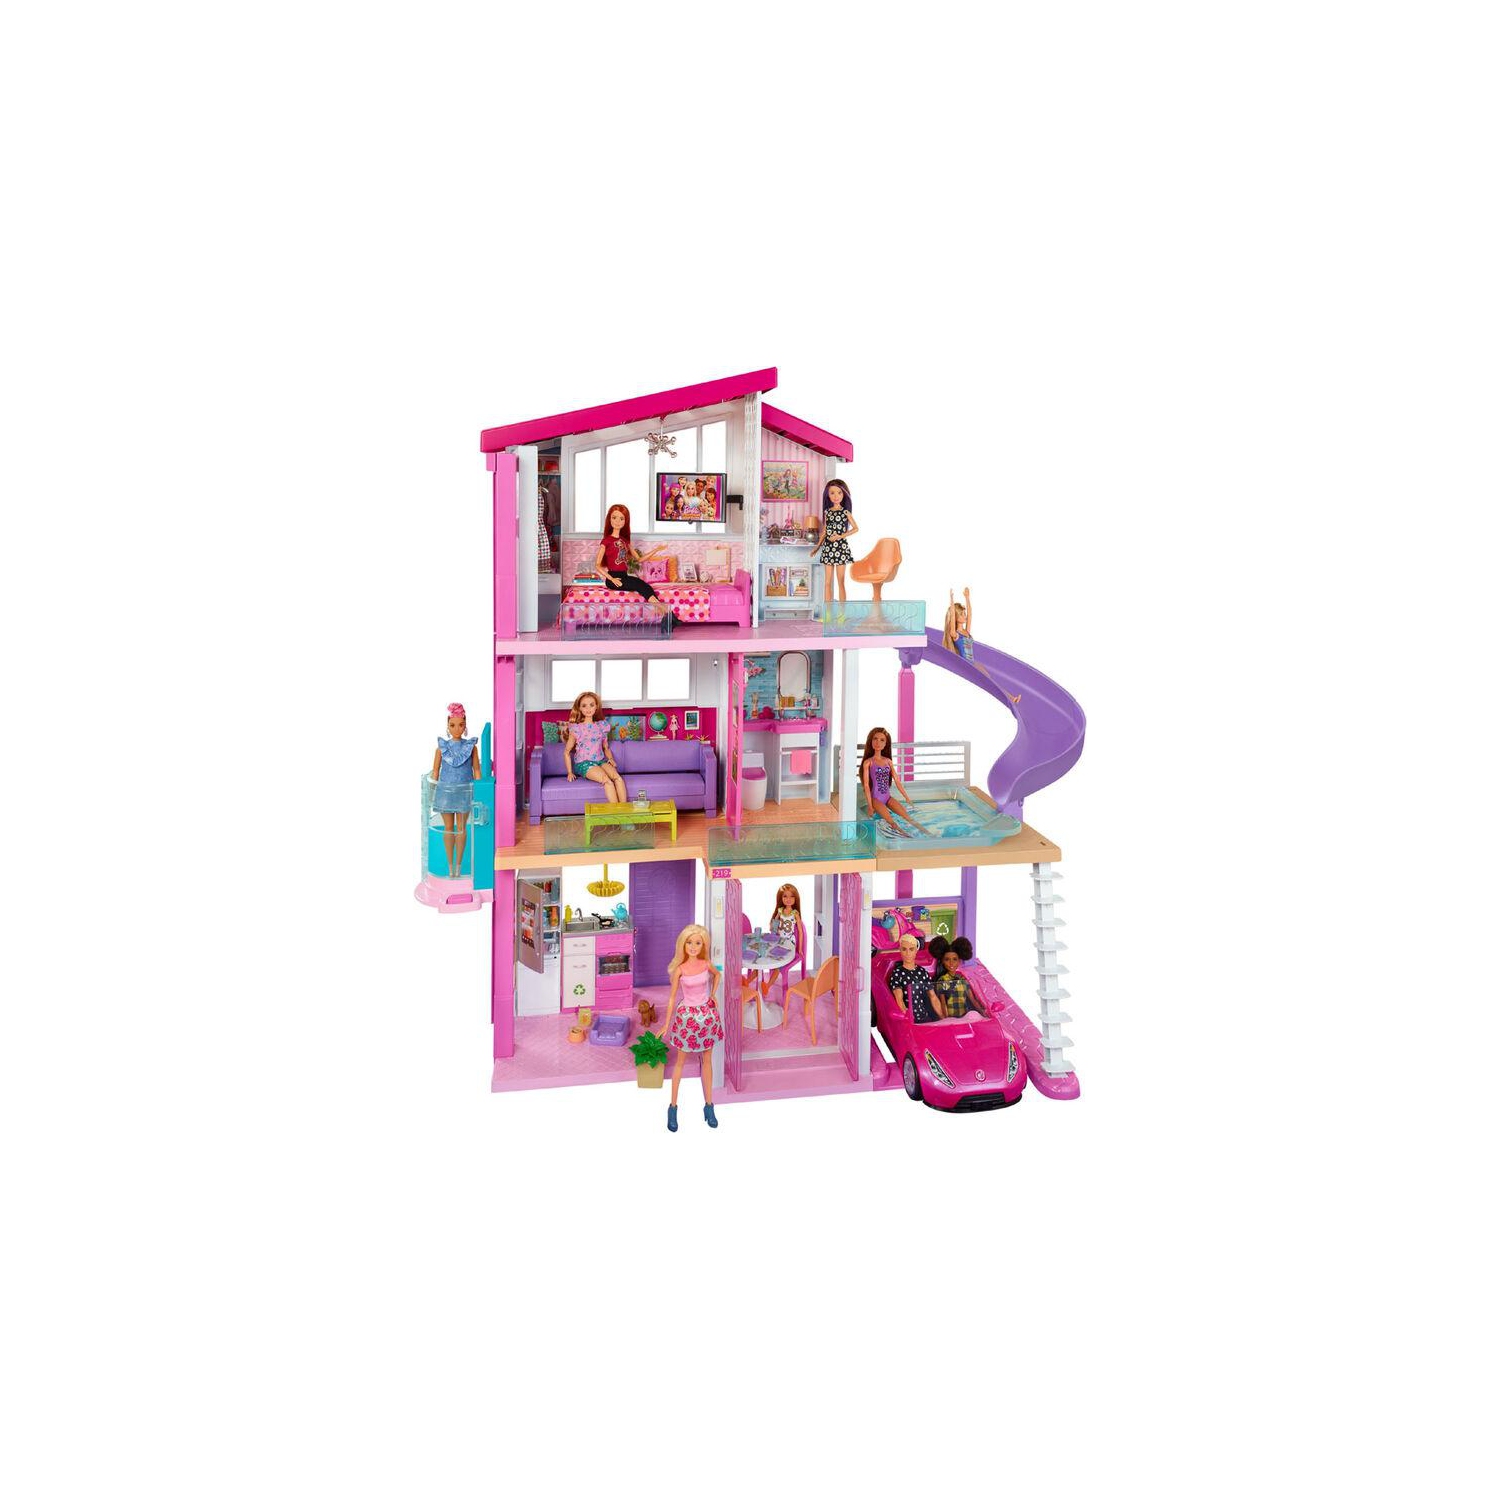 Mattel Barbie Dreamhouse Dollhouse with Pool, Slide and Elevator for Ages 3 - 7 years